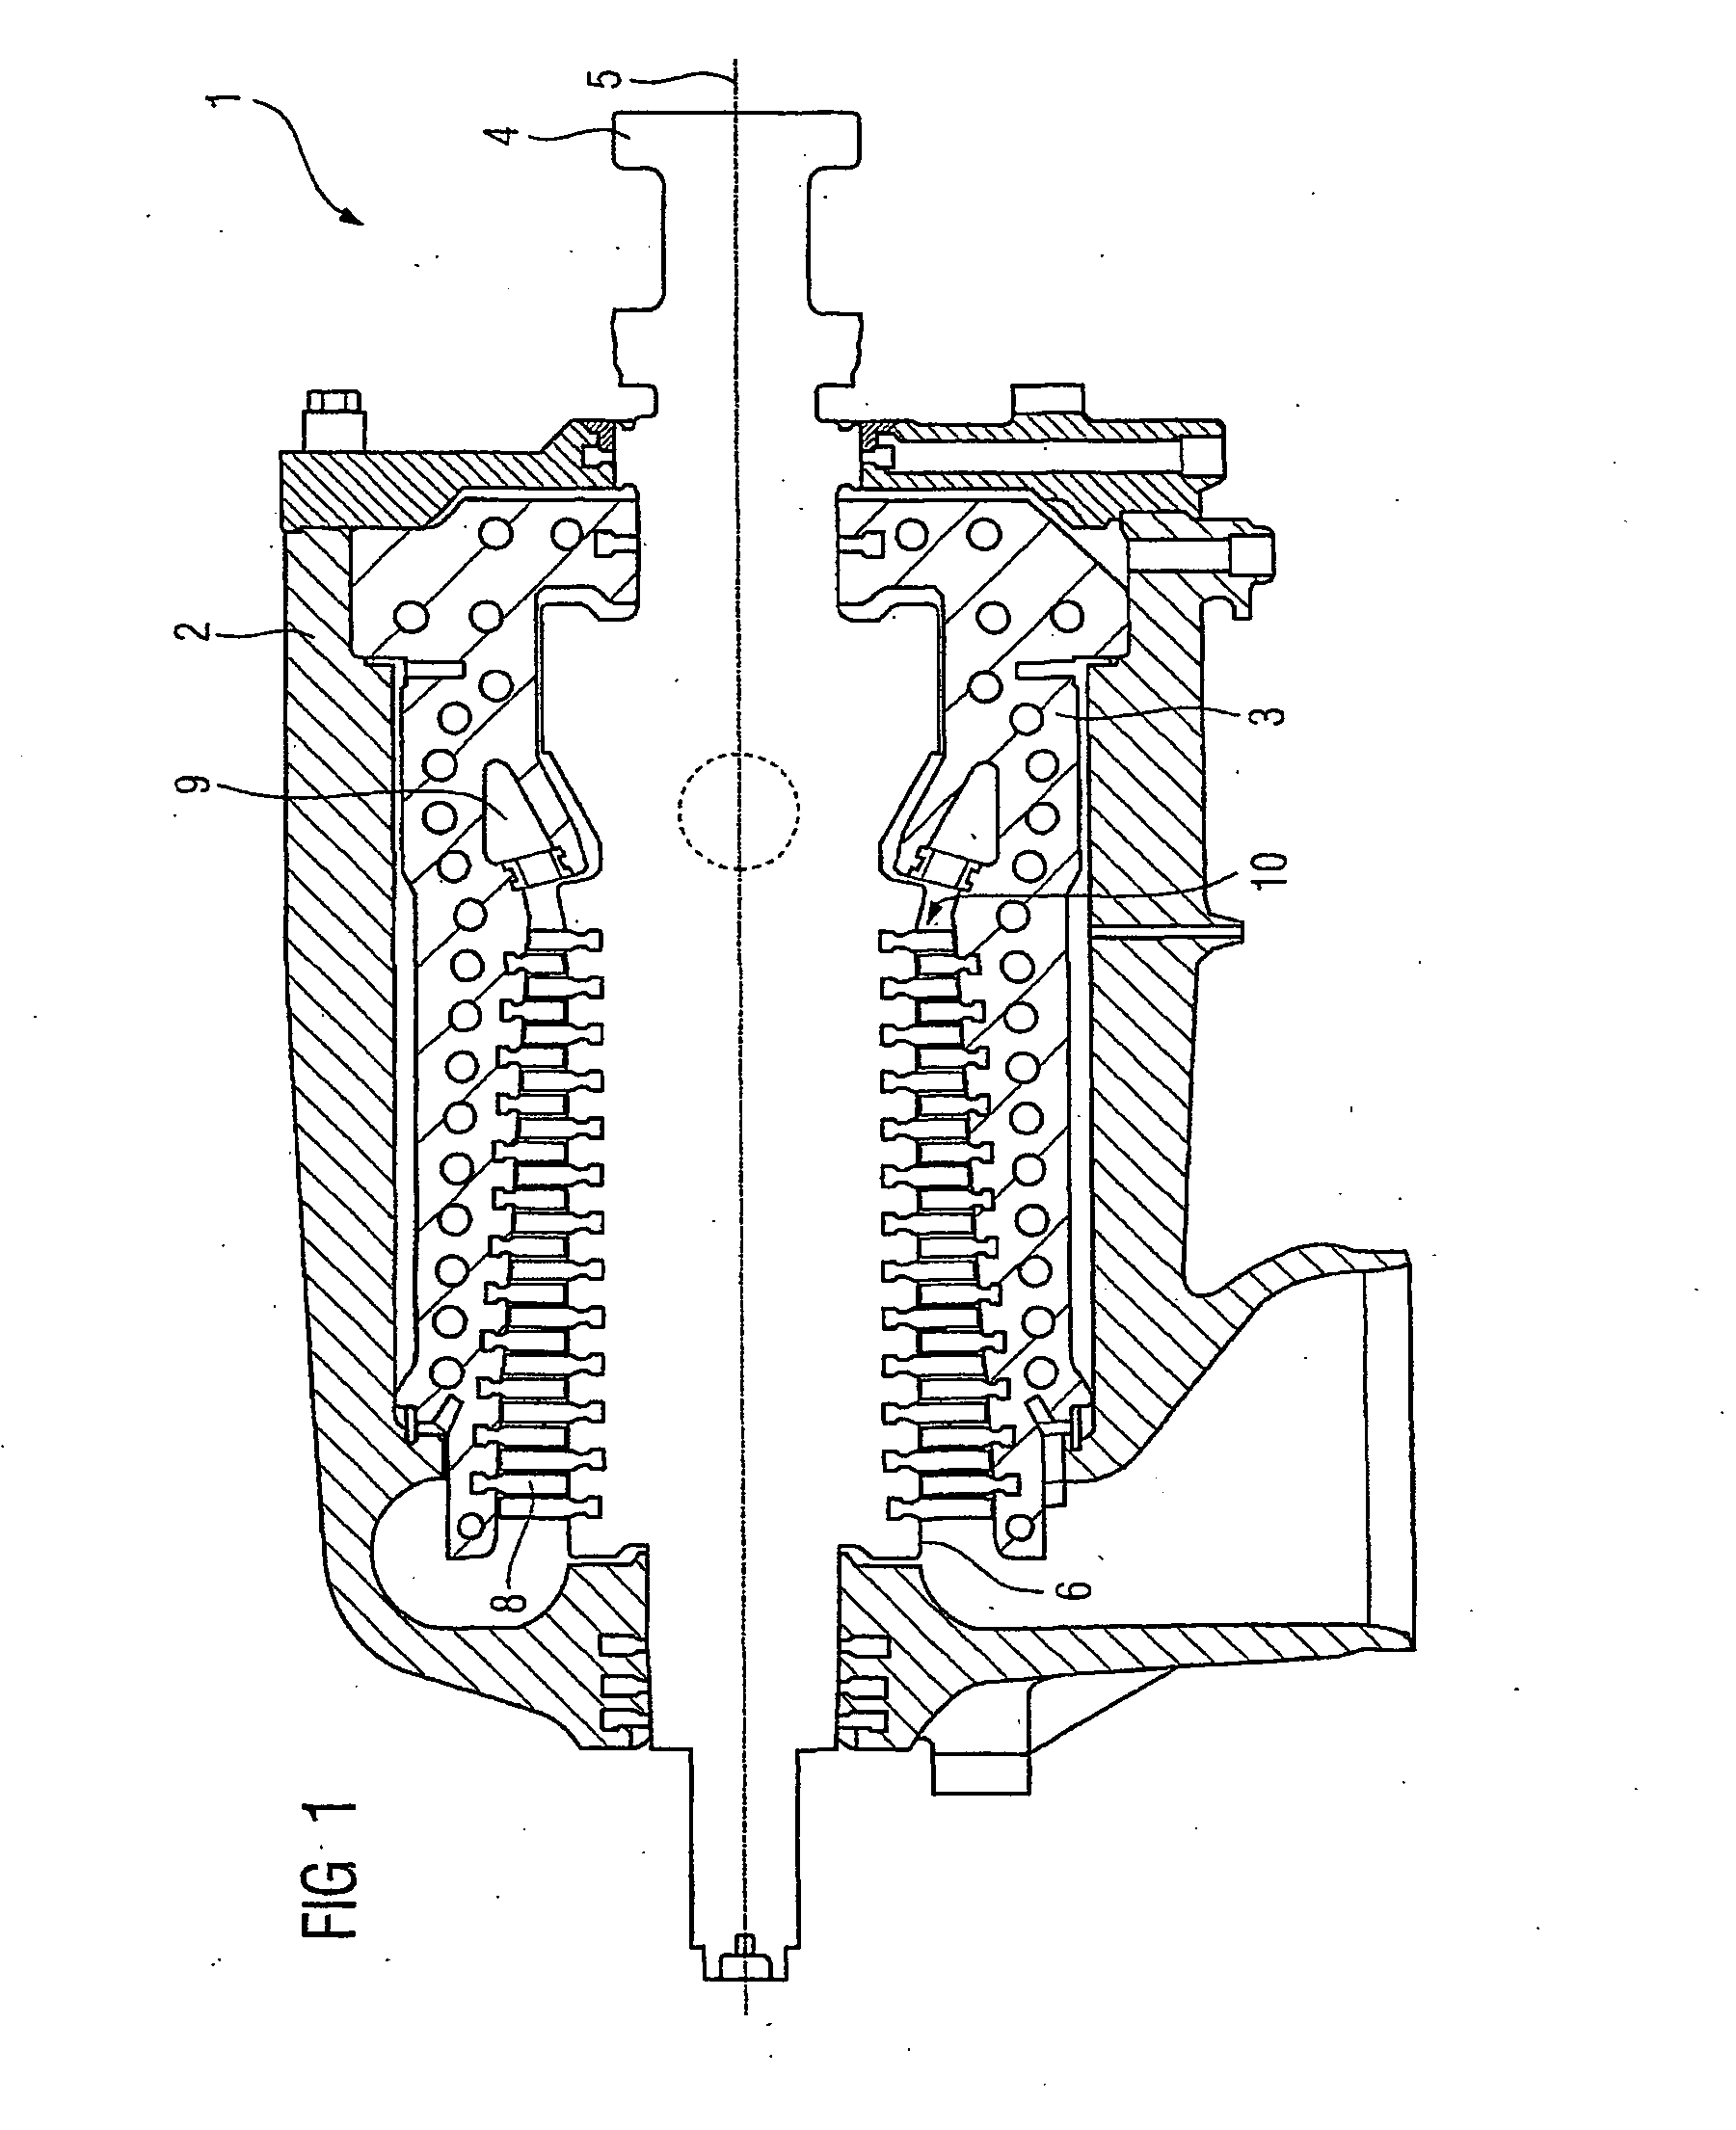 Method and Device for Determining Defects in a Turbine Blade